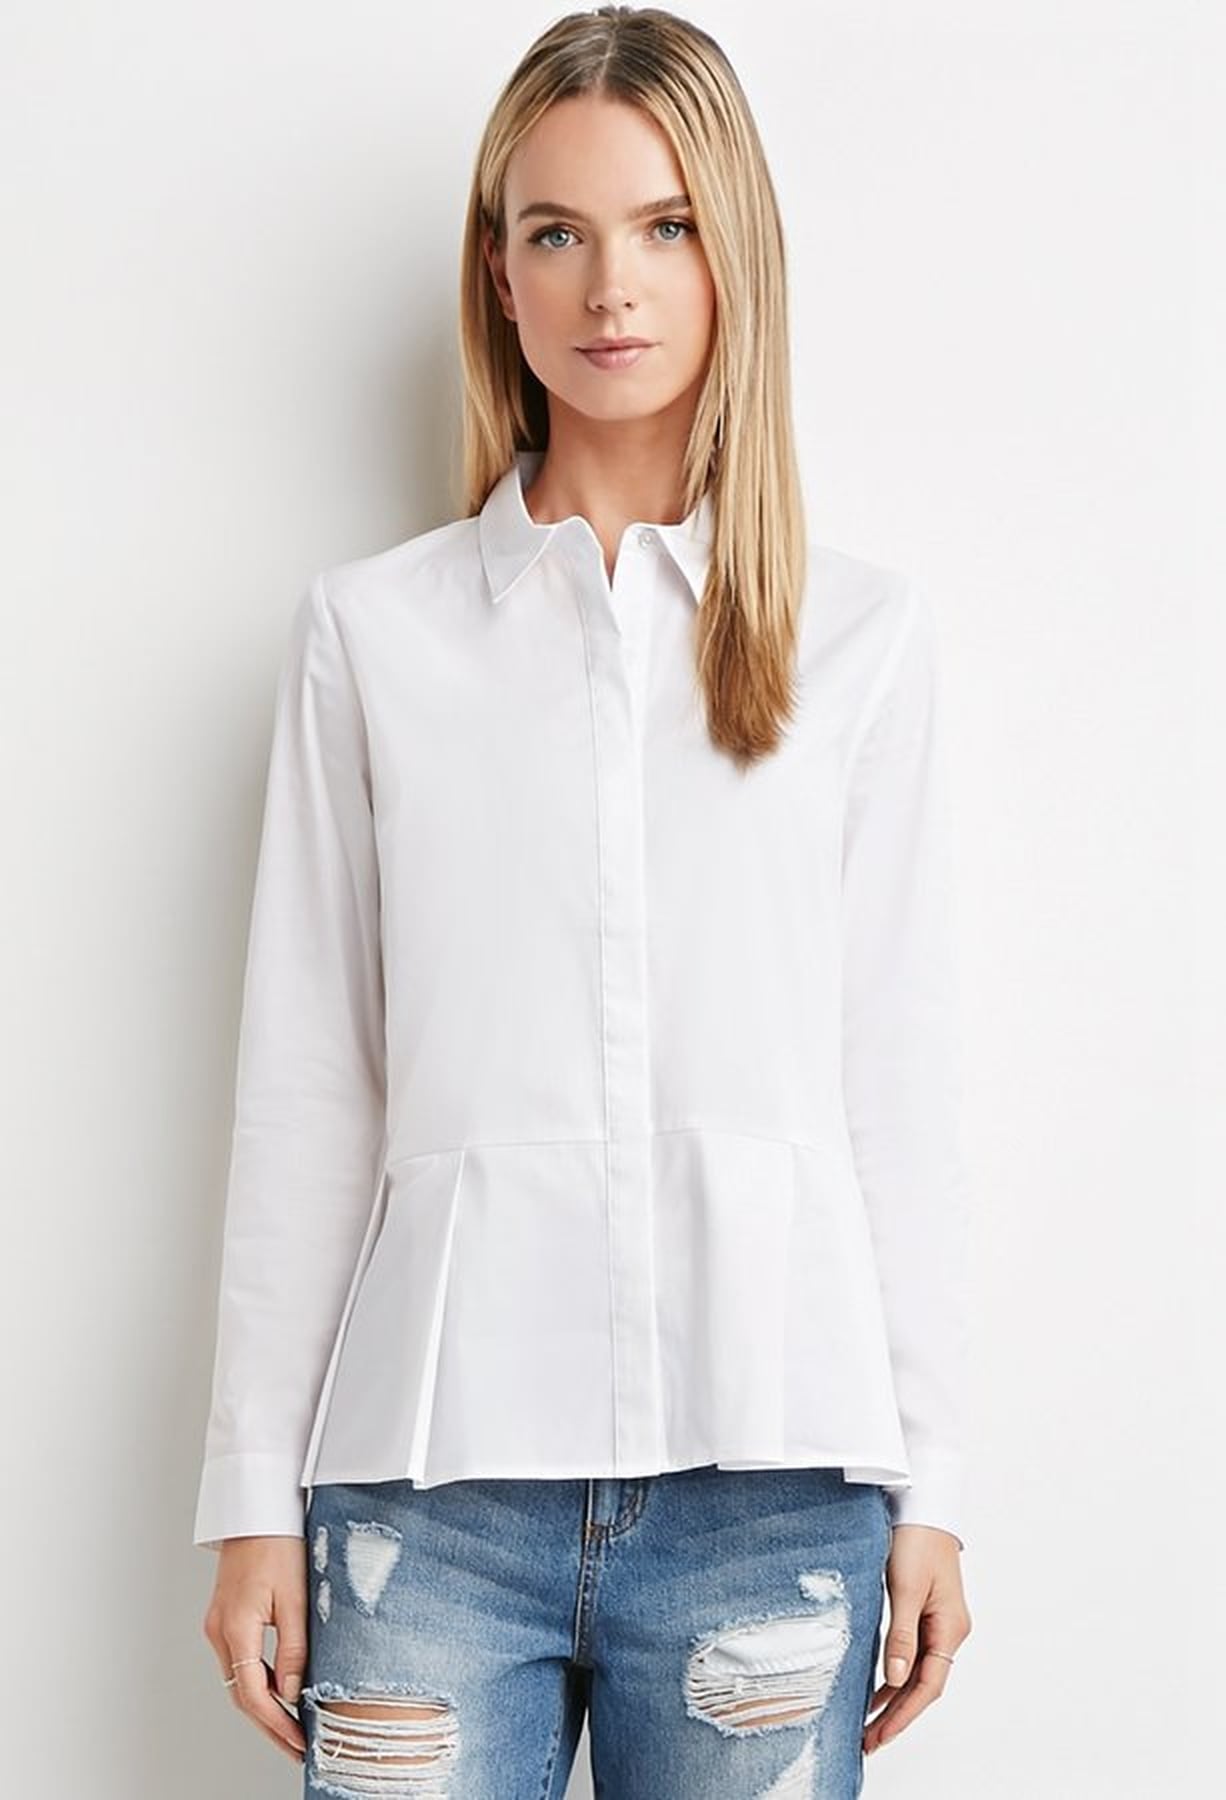 Work Clothes You Can Buy at Forever 21 | POPSUGAR Fashion